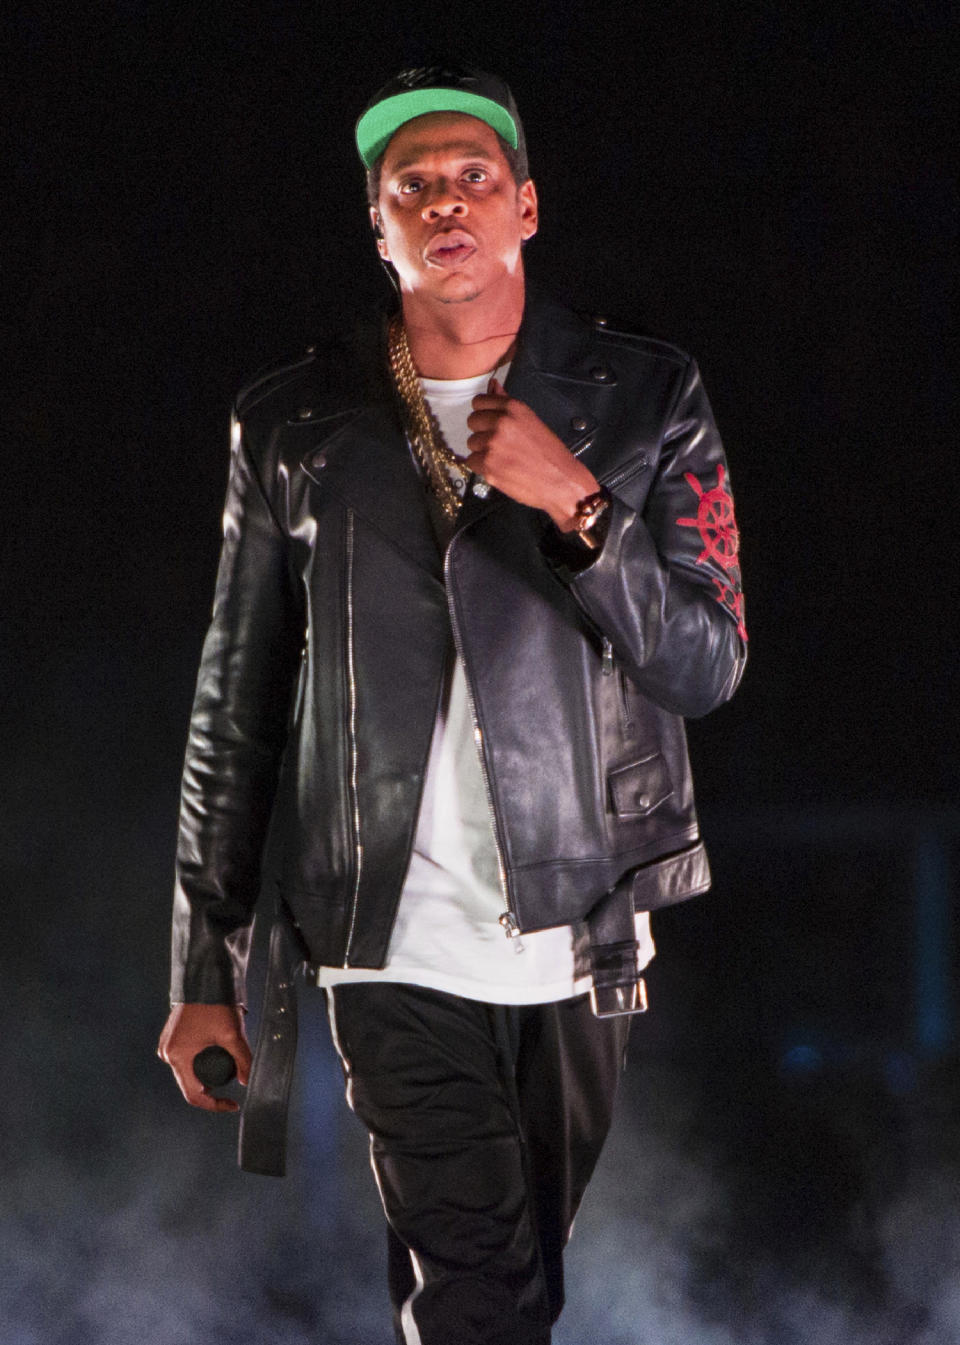 FILE - In this Nov. 26, 2017 file photo, Jay-Z performs on the 4:44 Tour at Barclays Center in New York. Jay-Z made this year’s list of nominees to the Rock and Roll Hall of Fame. The class of 2021 will be announced in May. (Photo by Scott Roth/Invision/AP, File)